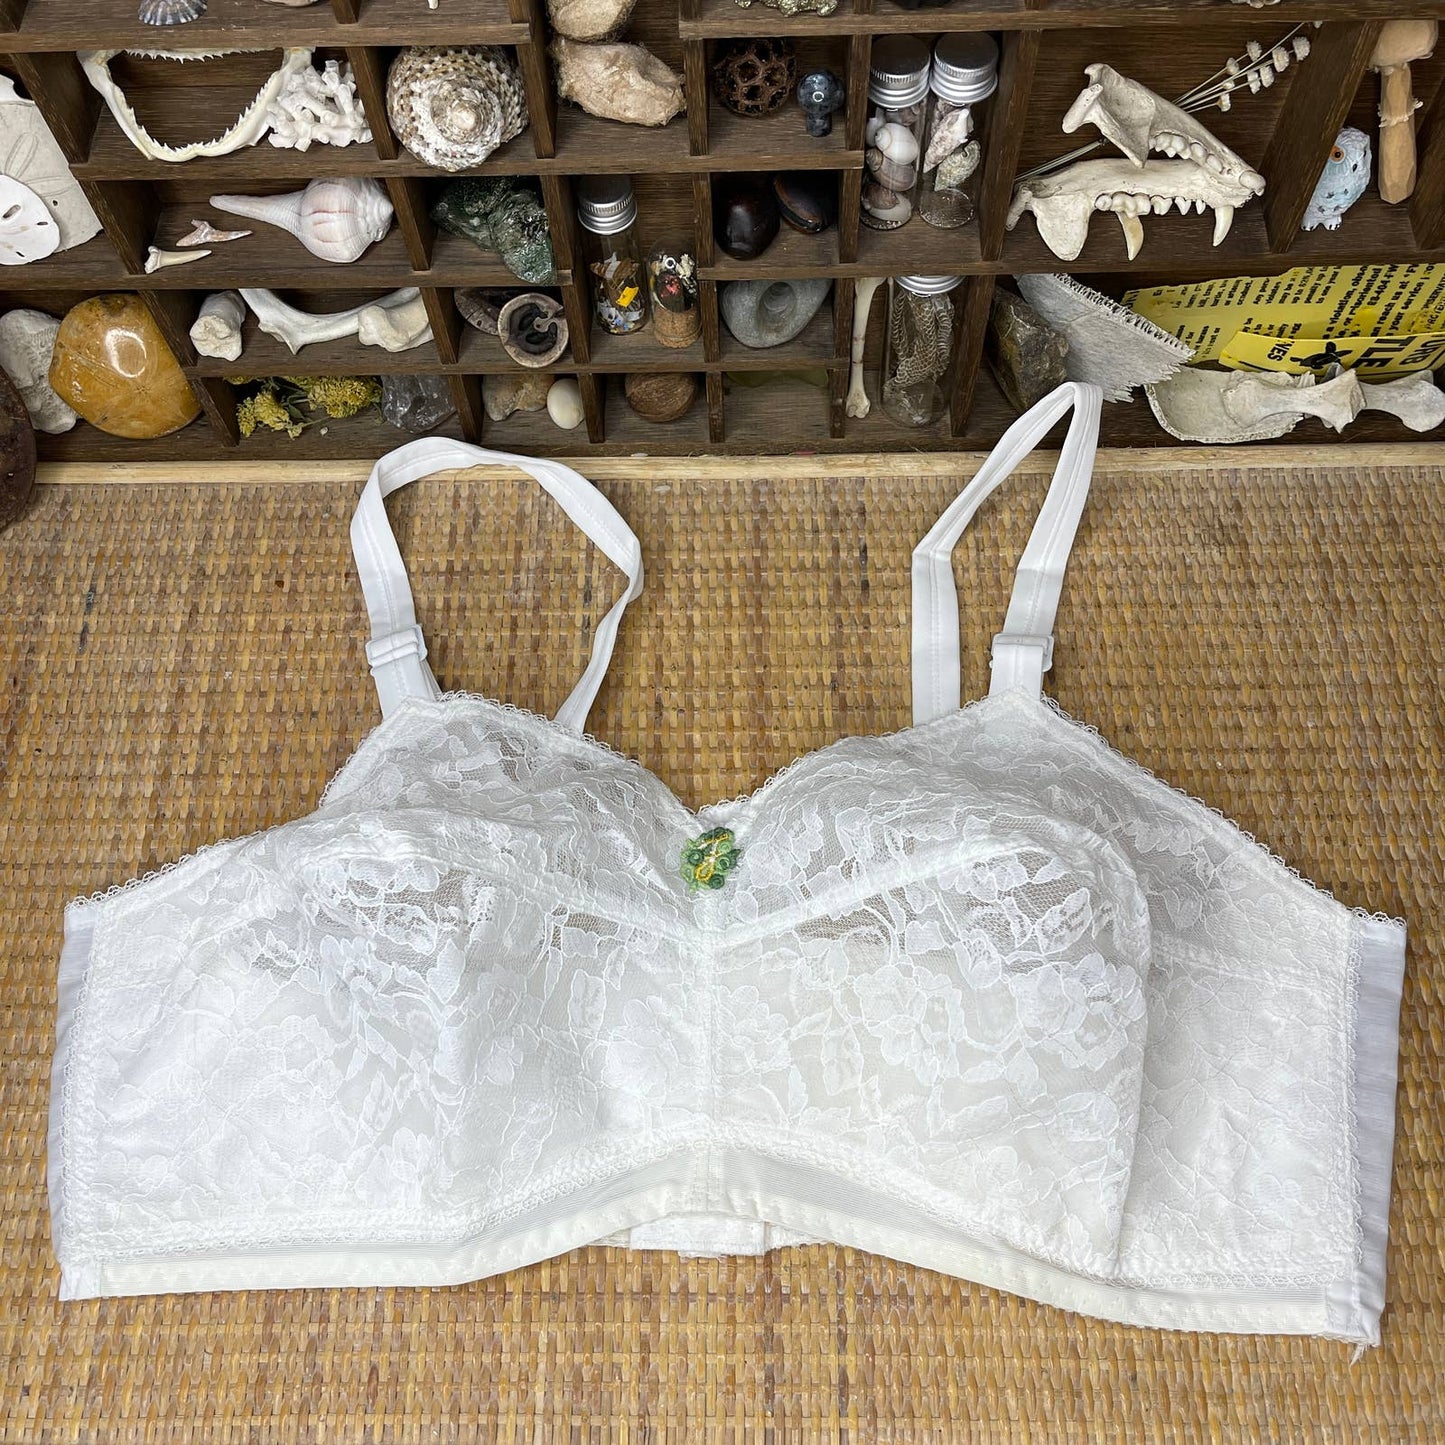 Vintage 60s White Lace Bullet Bra with Embroidered Flower by Figurettes Size 42E